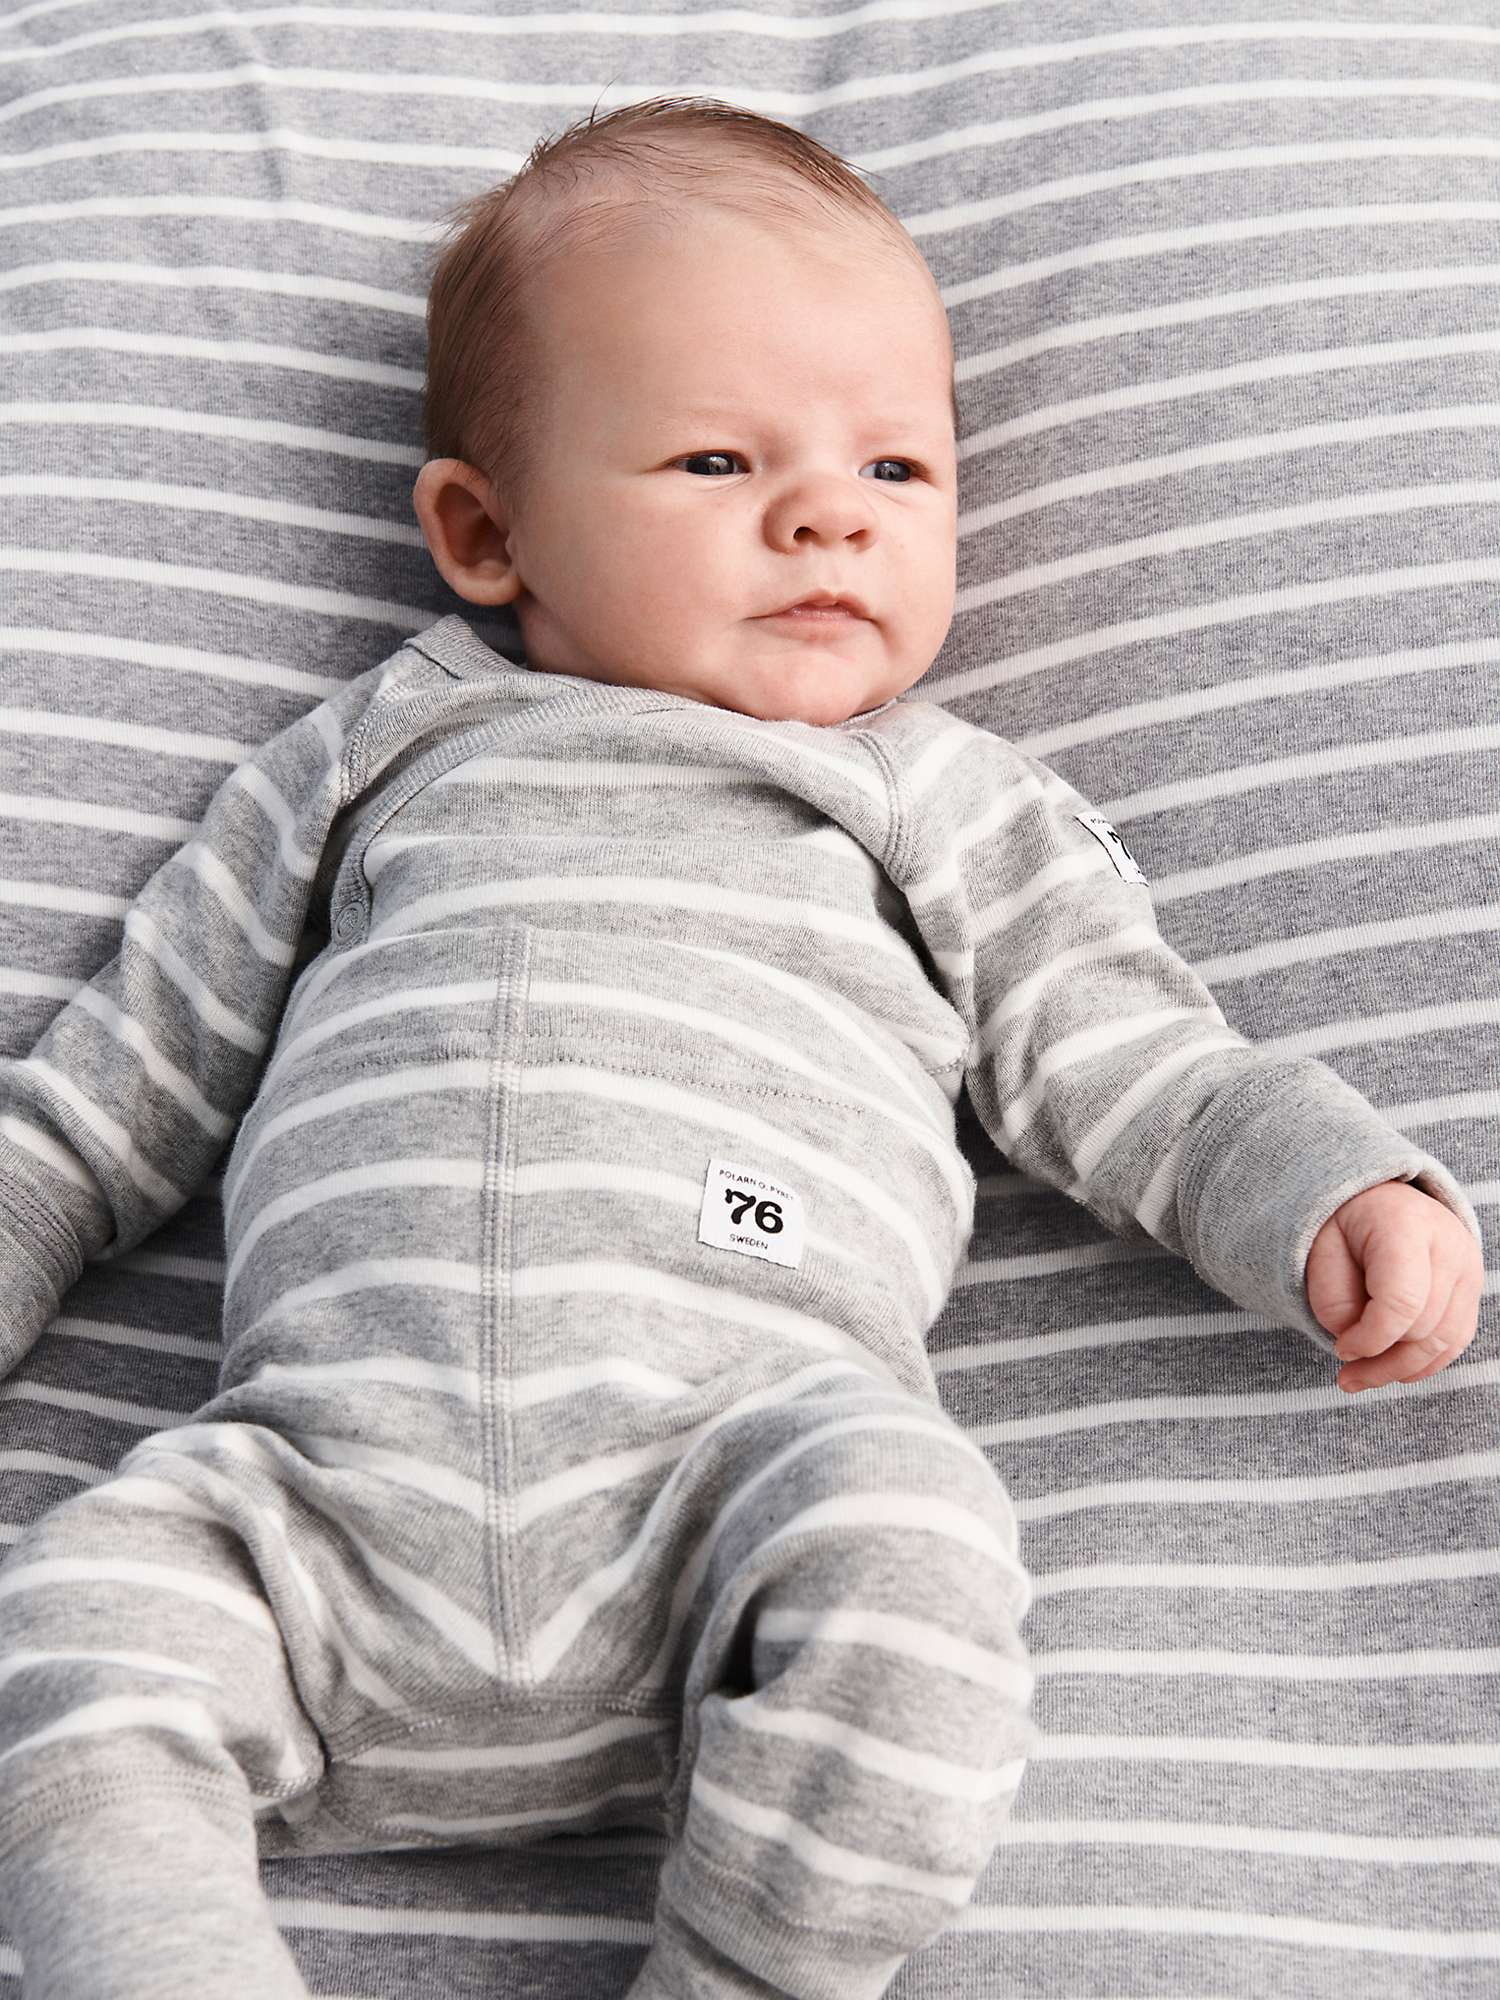 Buy Polarn O. Pyret Baby Organic Cotton Stripe Trousers Online at johnlewis.com